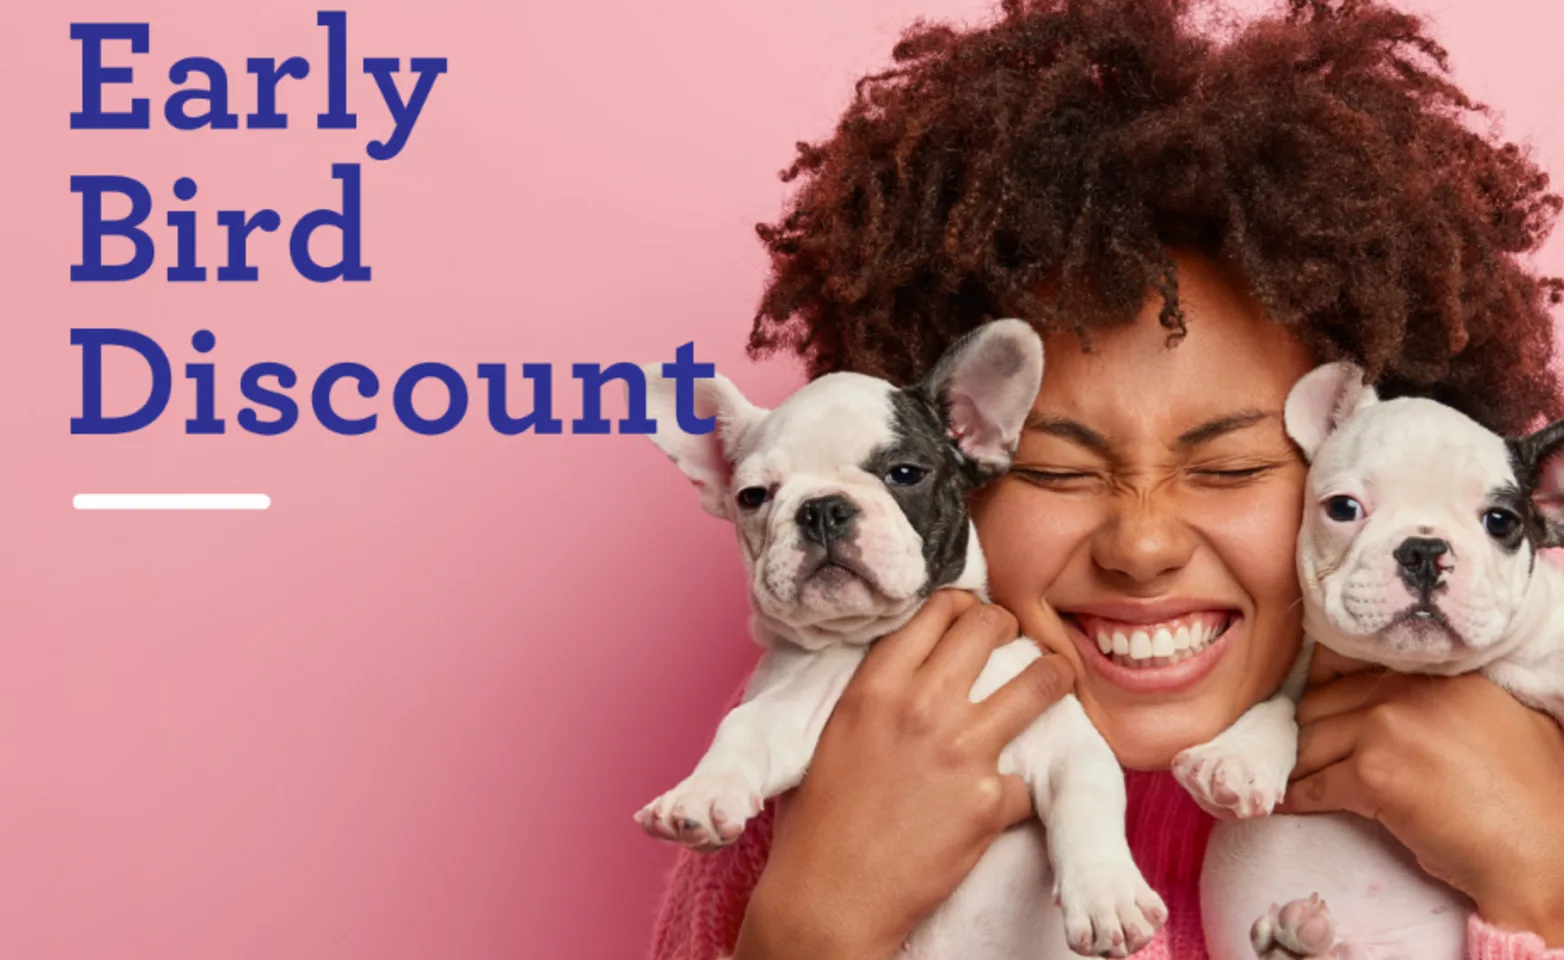 Early Bird Discount photo of a girl smiling holding up 2 small puppies